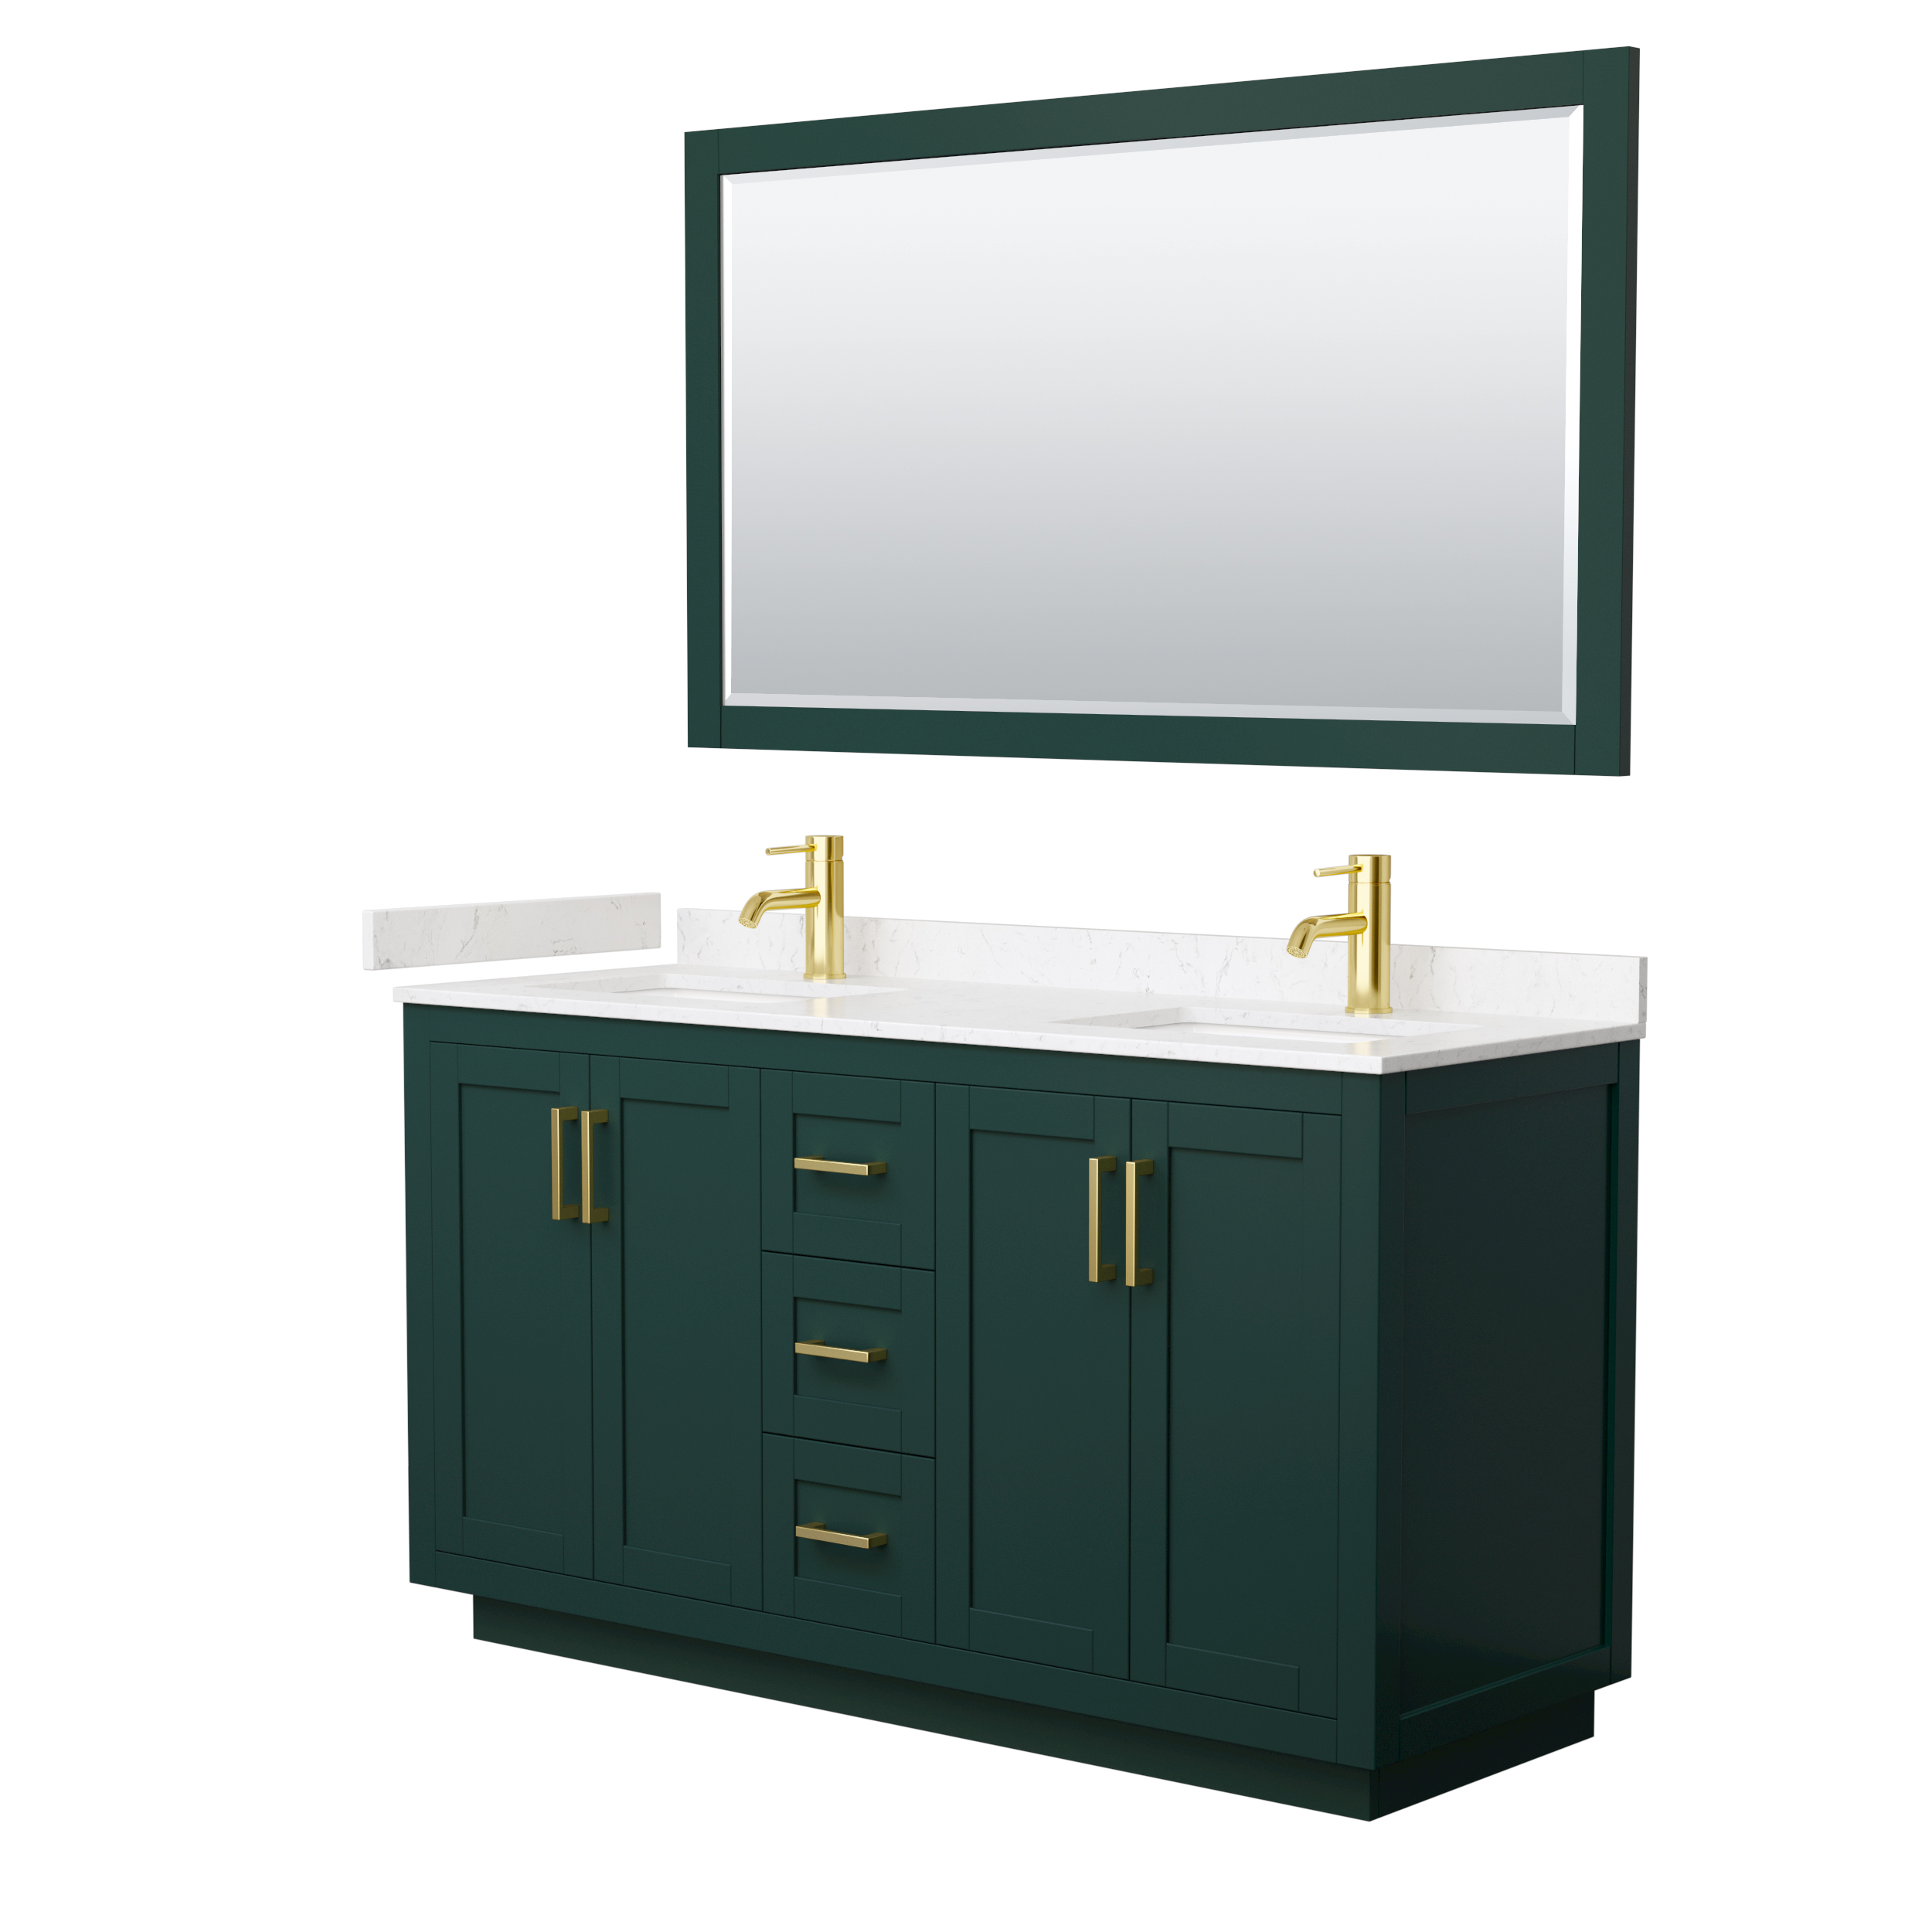 Miranda 60" Double Vanity with Cultured Marble Counter - Green WC-2929-60-DBL-VAN-GRN-